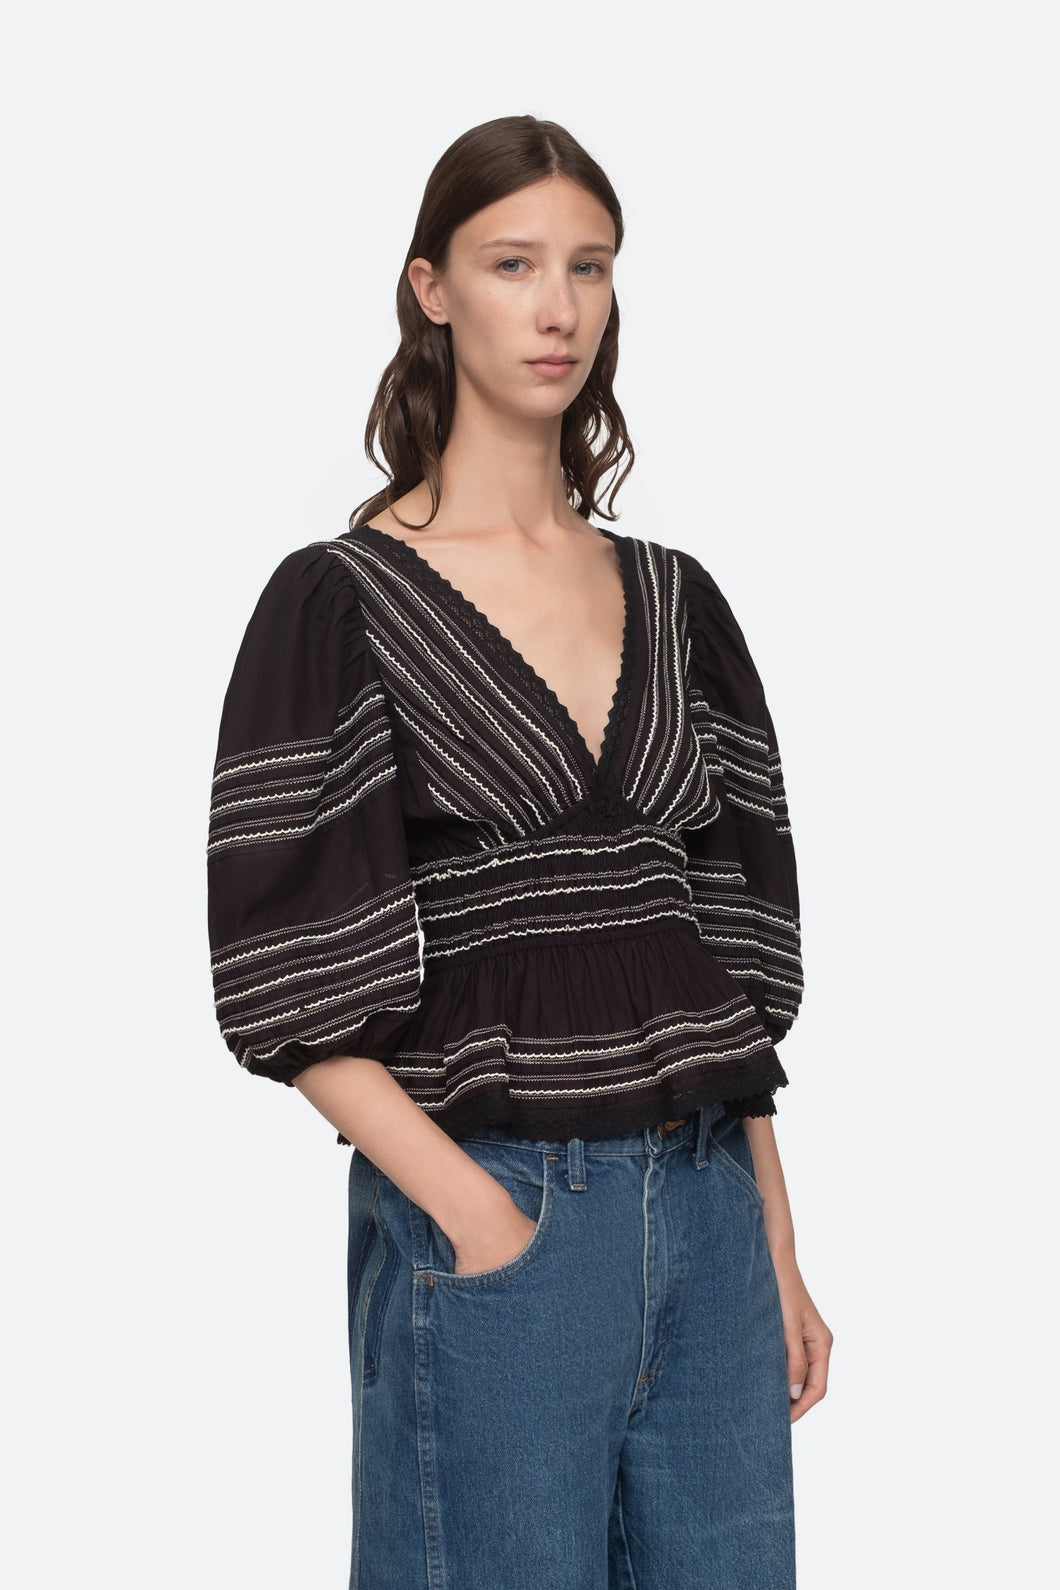 Mable Cambric Puff Sleeve Top Black